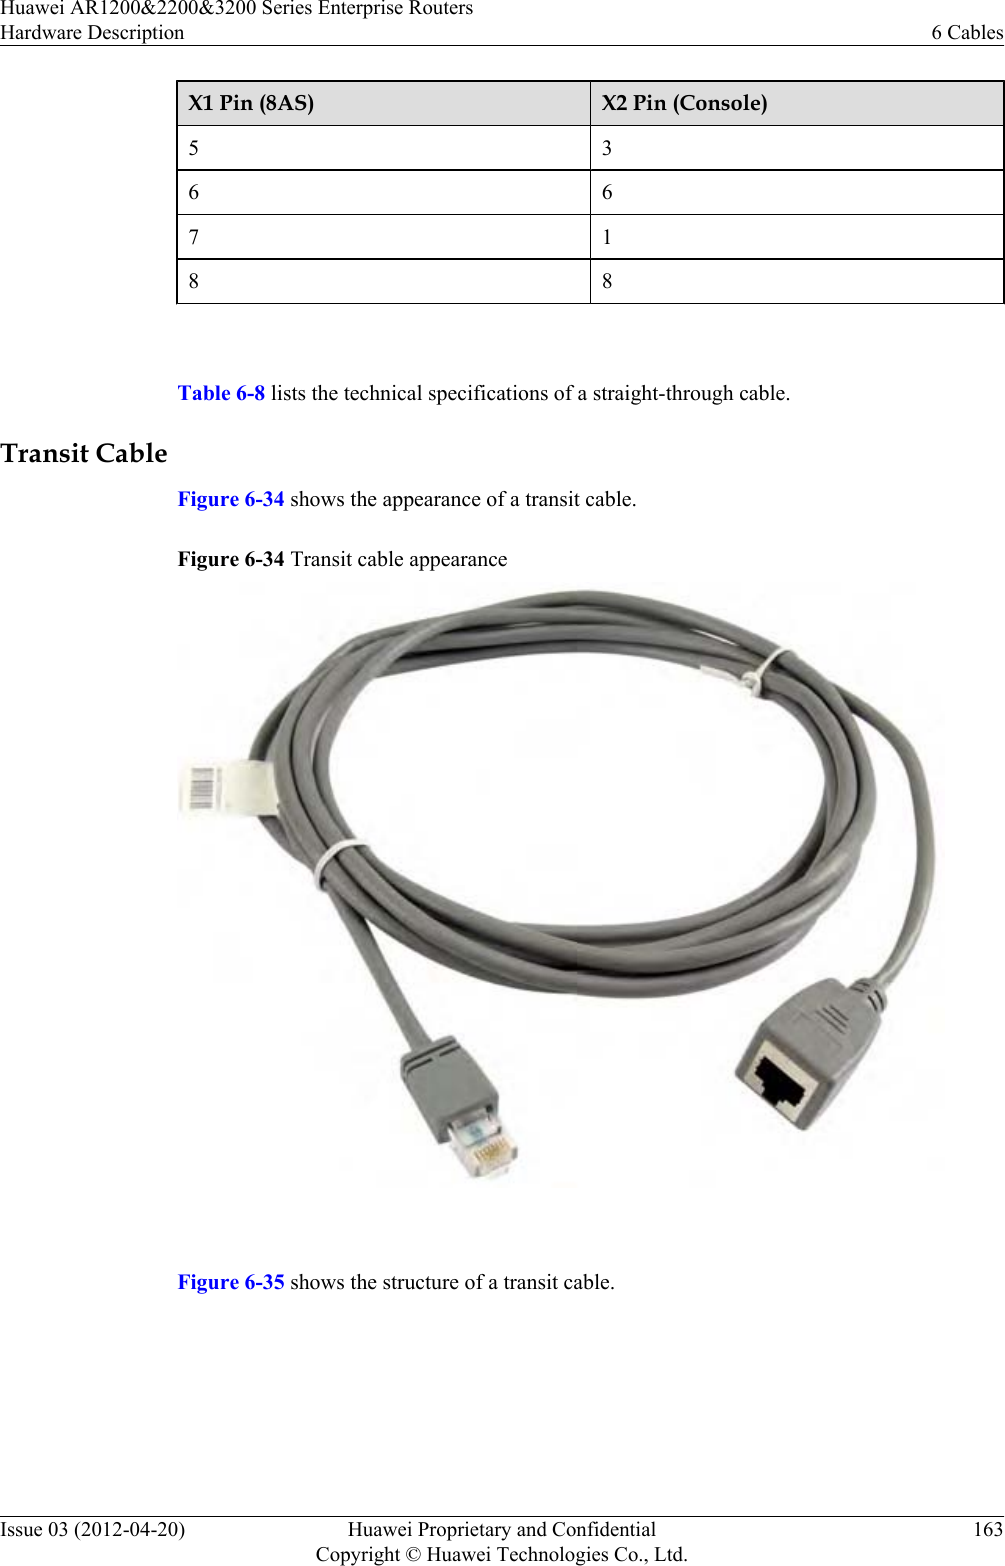 X1 Pin (8AS) X2 Pin (Console)5 36 67 18 8 Table 6-8 lists the technical specifications of a straight-through cable.Transit CableFigure 6-34 shows the appearance of a transit cable.Figure 6-34 Transit cable appearance Figure 6-35 shows the structure of a transit cable.Huawei AR1200&amp;2200&amp;3200 Series Enterprise RoutersHardware Description 6 CablesIssue 03 (2012-04-20) Huawei Proprietary and ConfidentialCopyright © Huawei Technologies Co., Ltd.163